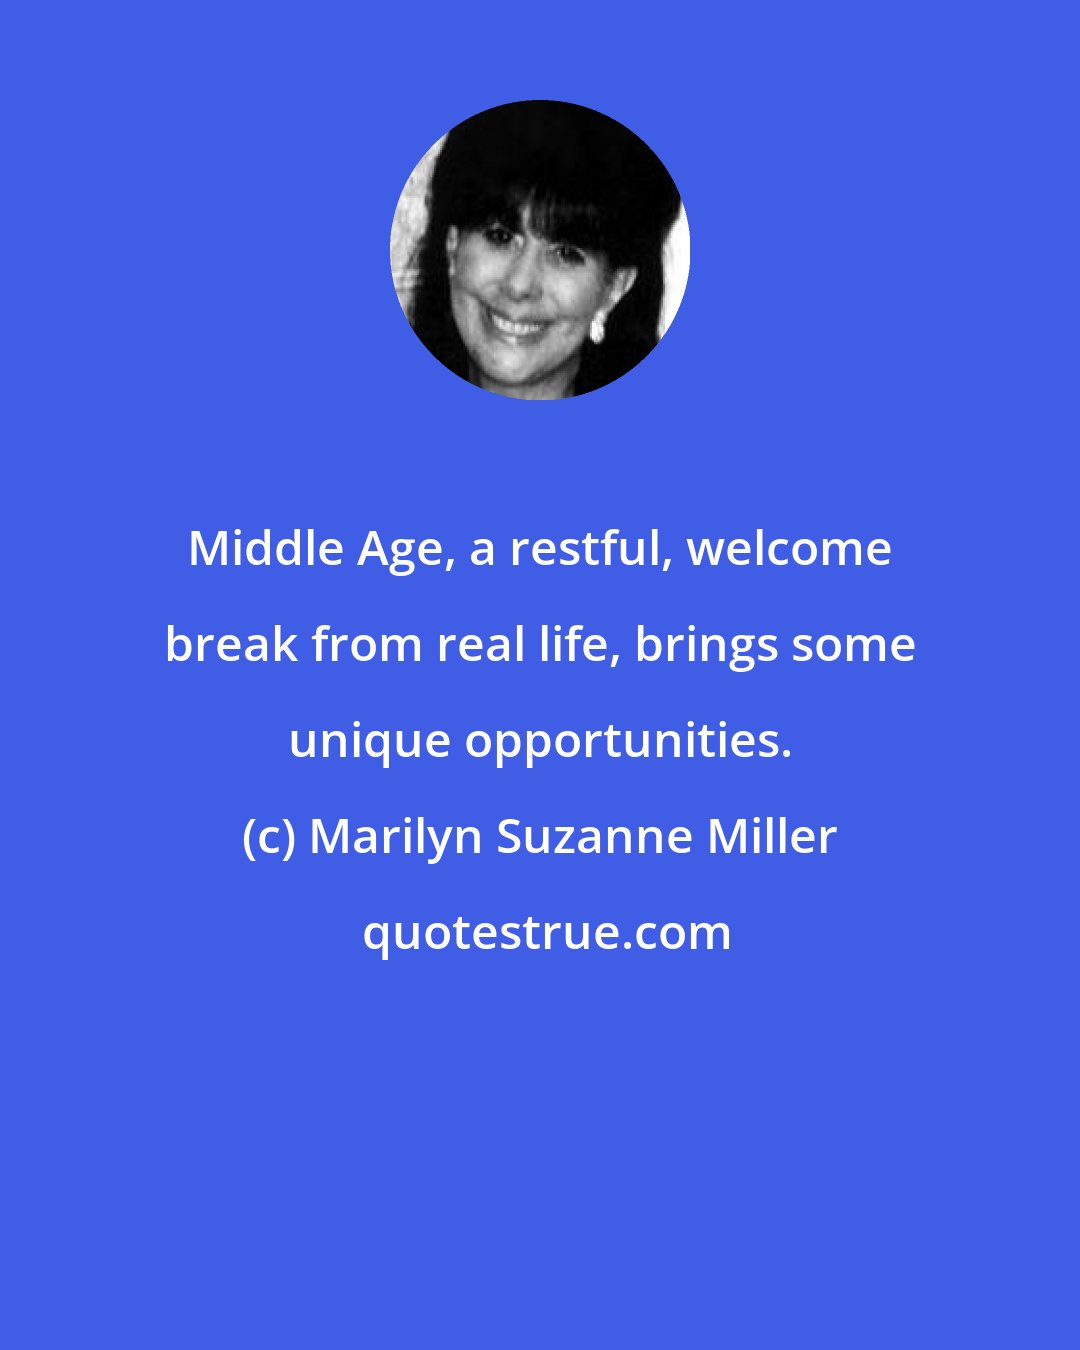 Marilyn Suzanne Miller: Middle Age, a restful, welcome break from real life, brings some unique opportunities.